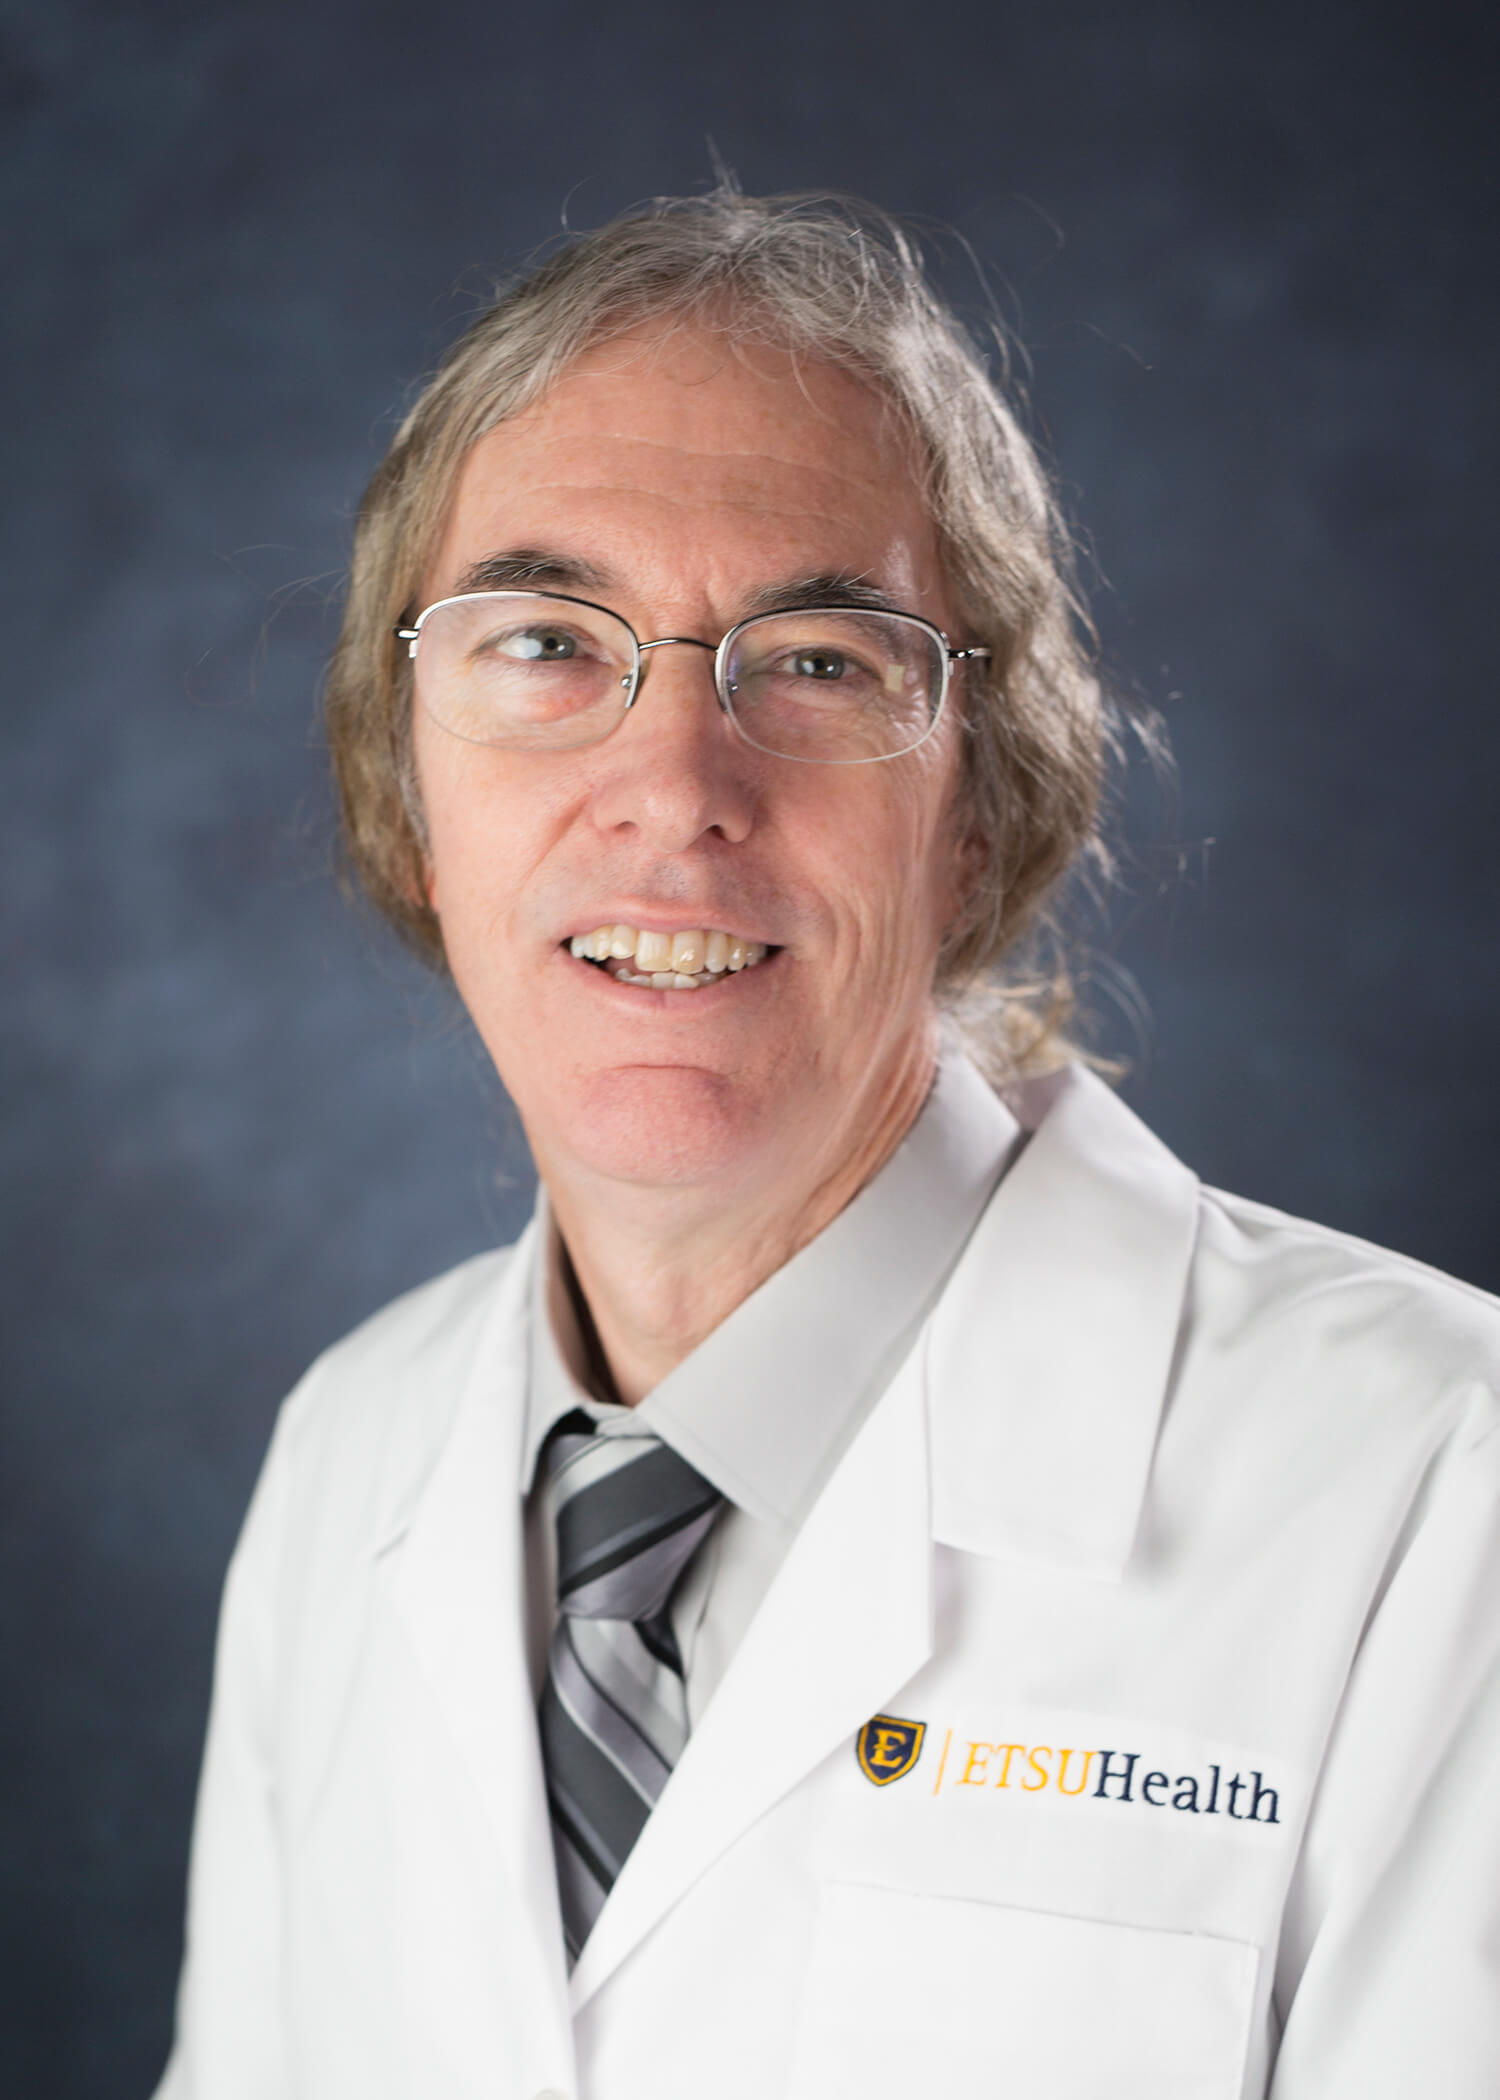 Photo of Gregory Clarity, M.D.